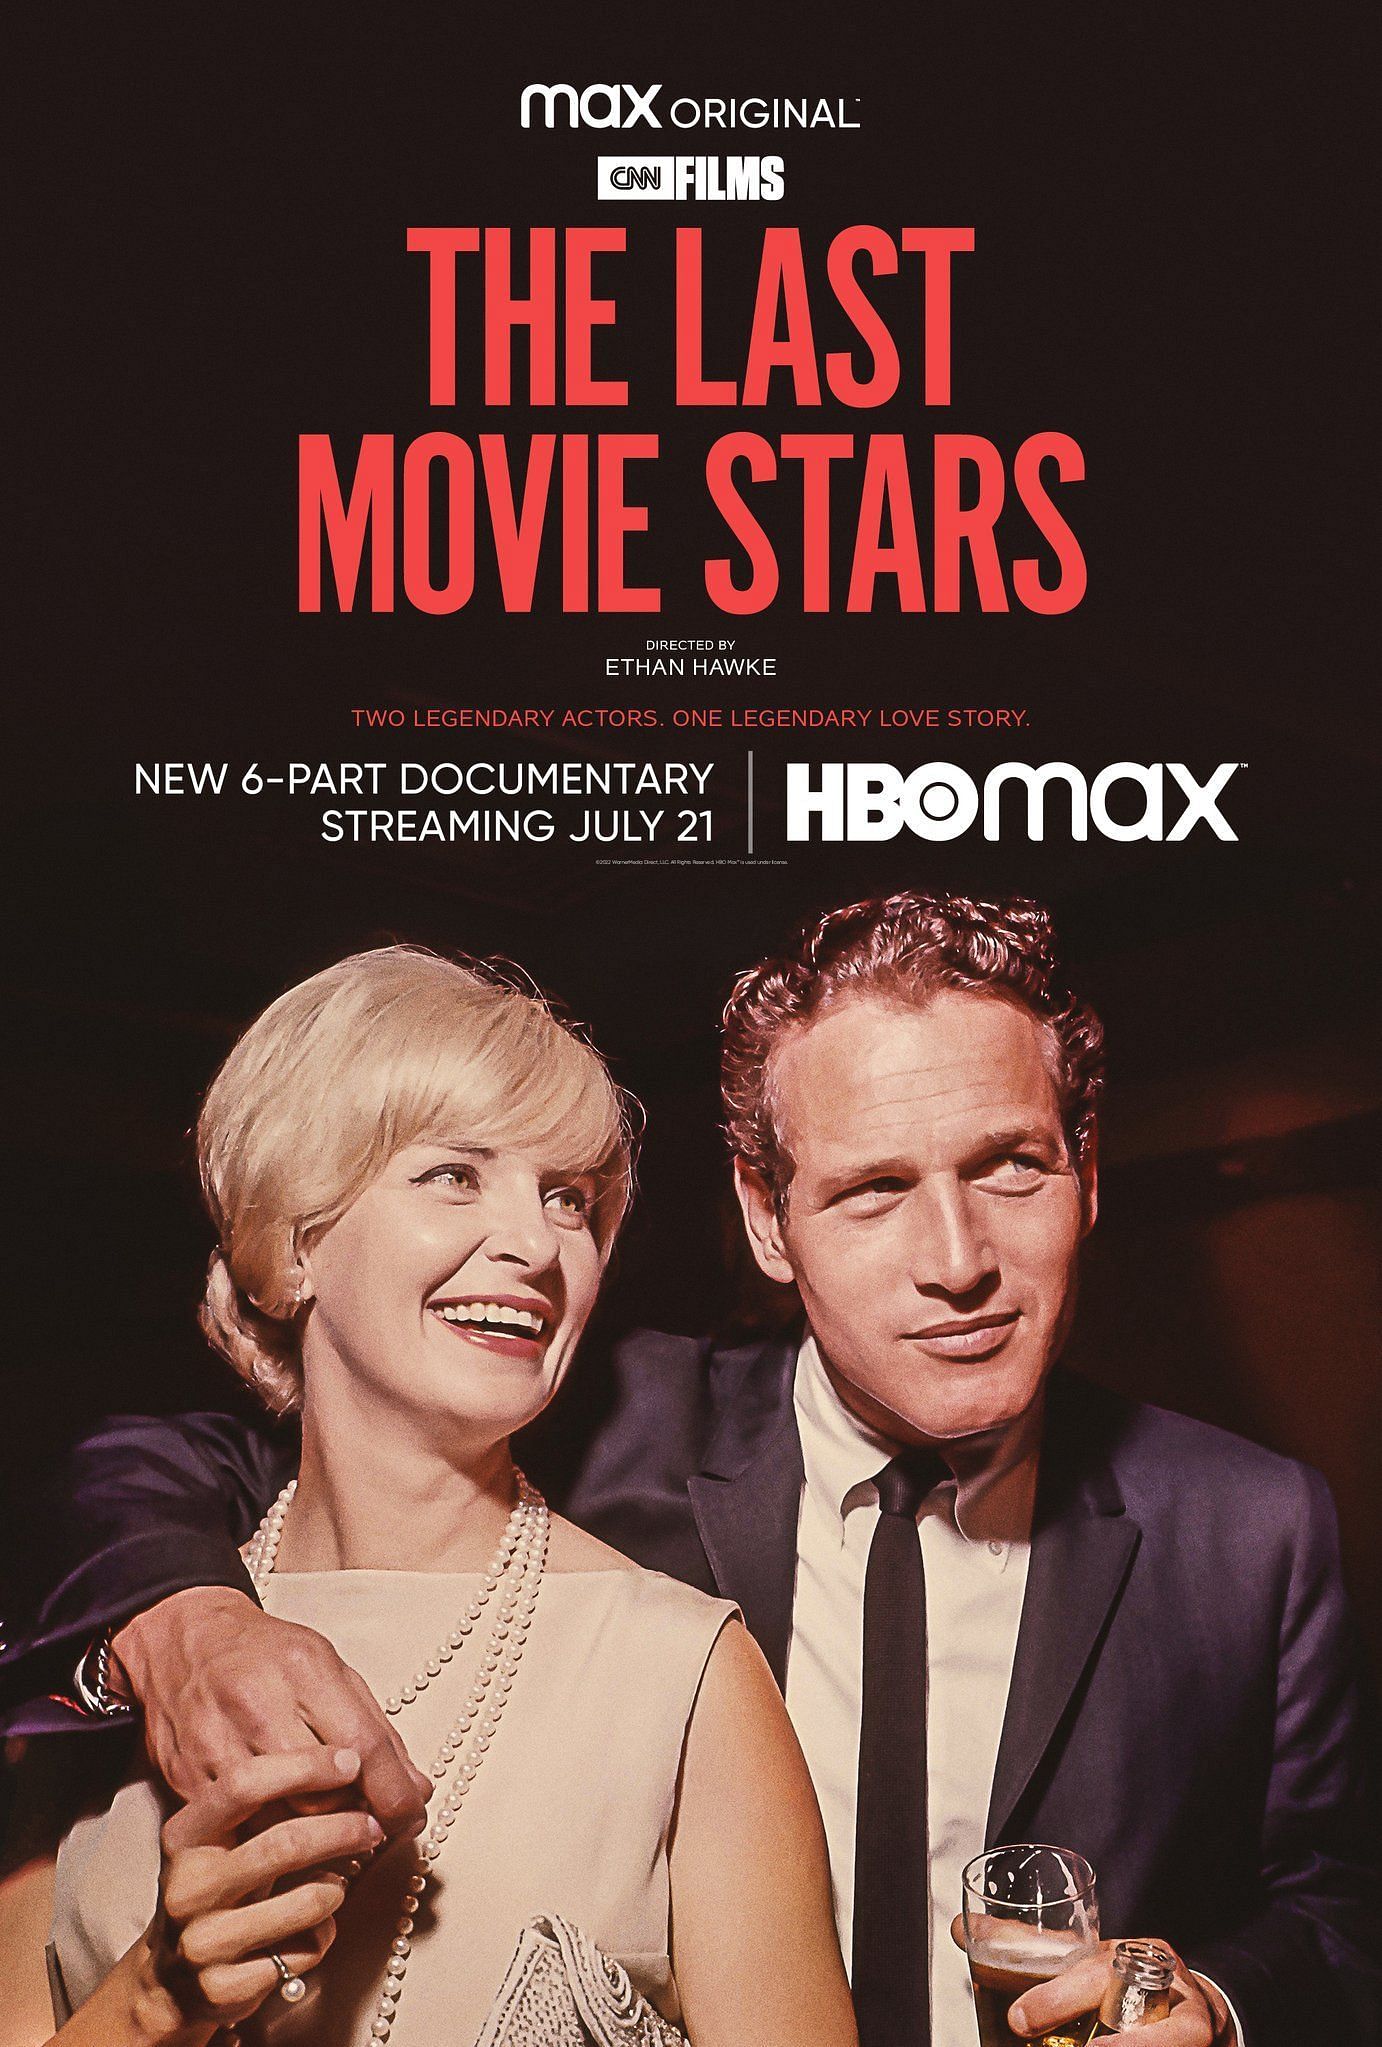 The Last Movie Stars promotional poster (Image via HBO)